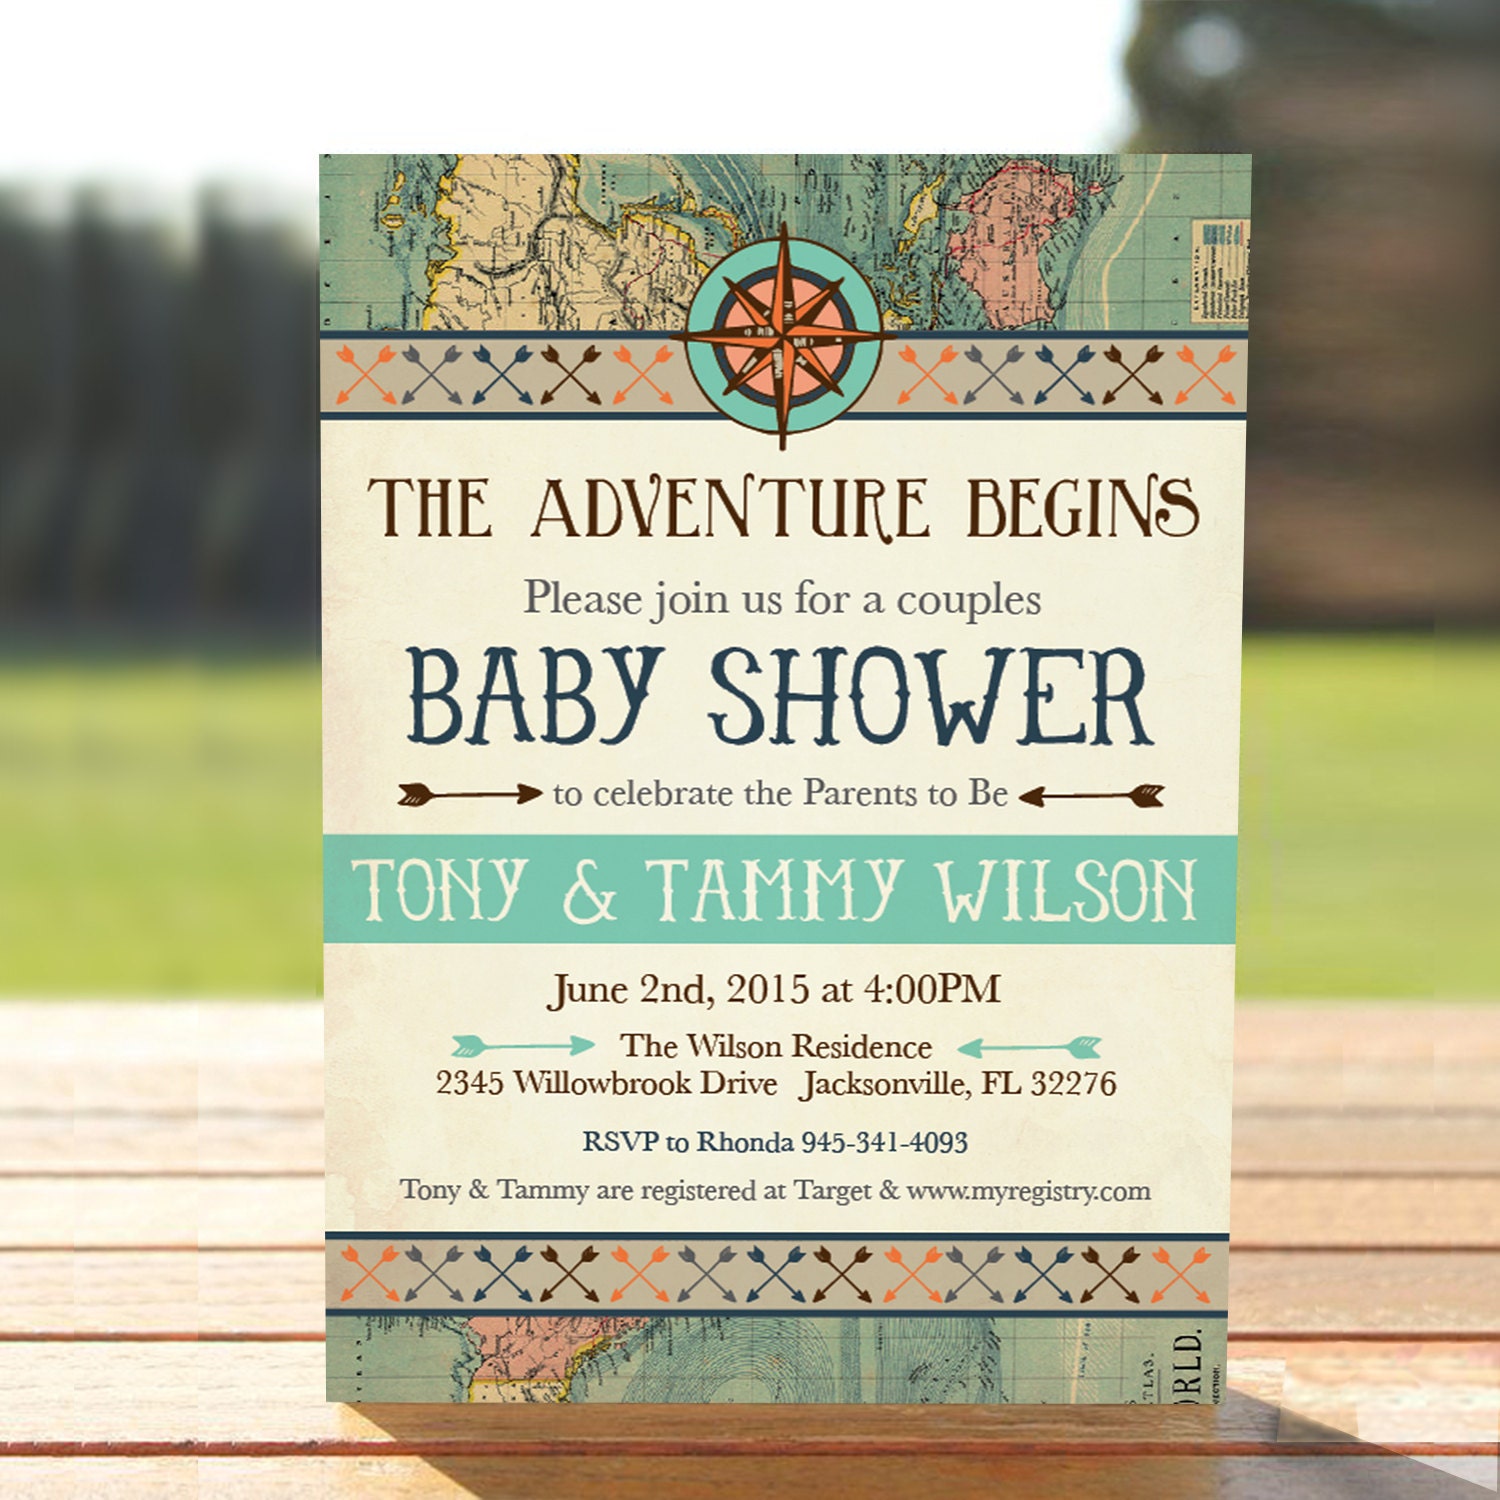 Couples Baby Shower Invitations